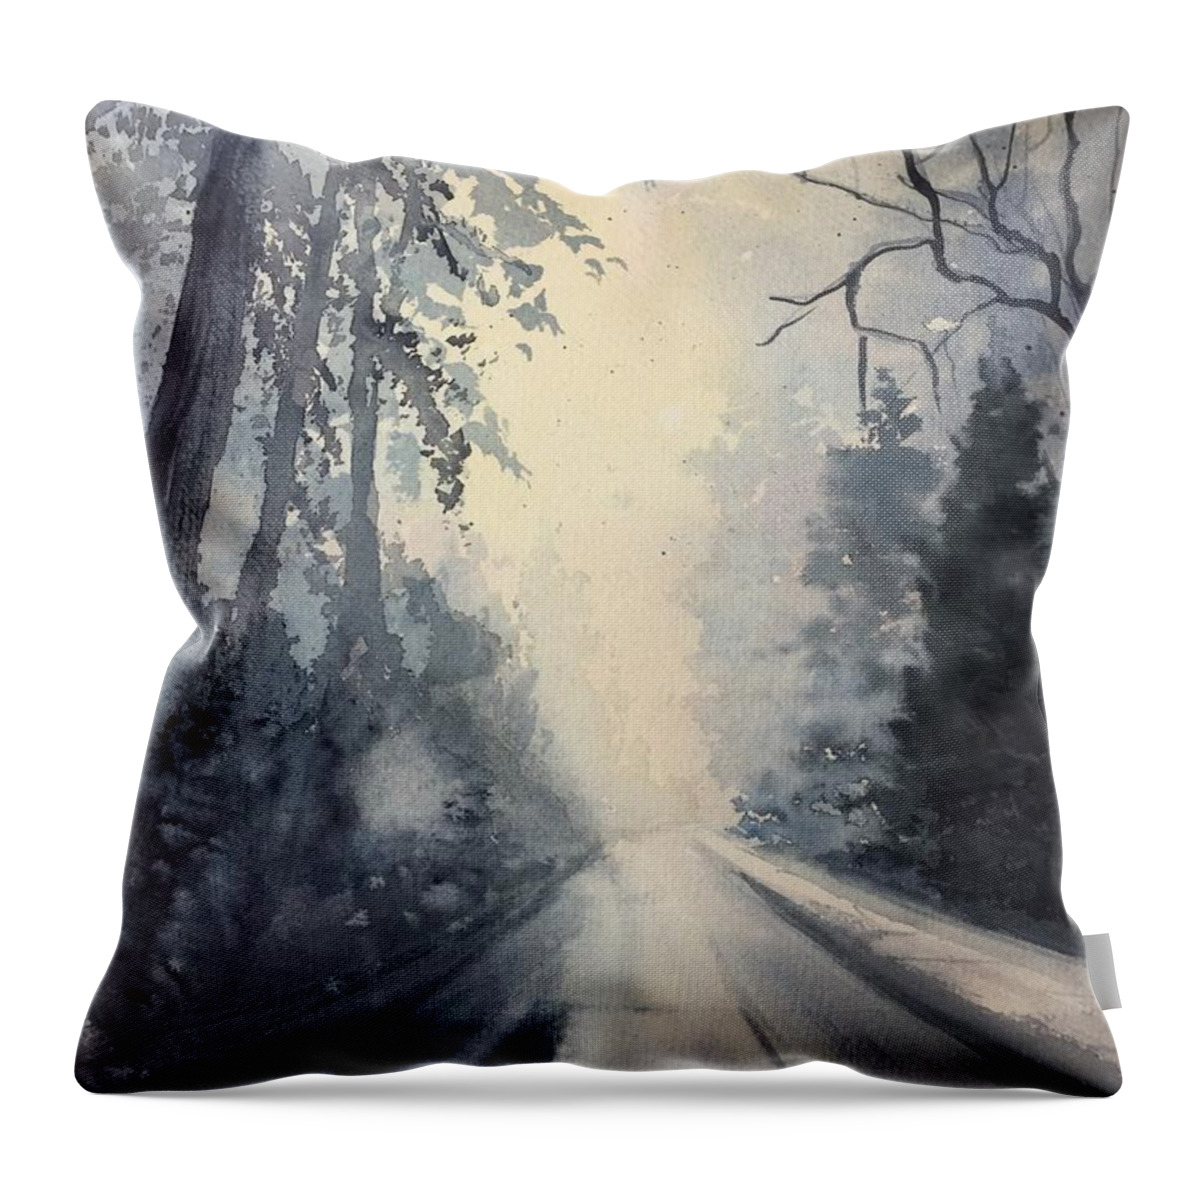 Watercolor Throw Pillow featuring the painting Winter Blues by Watercolor Meditations